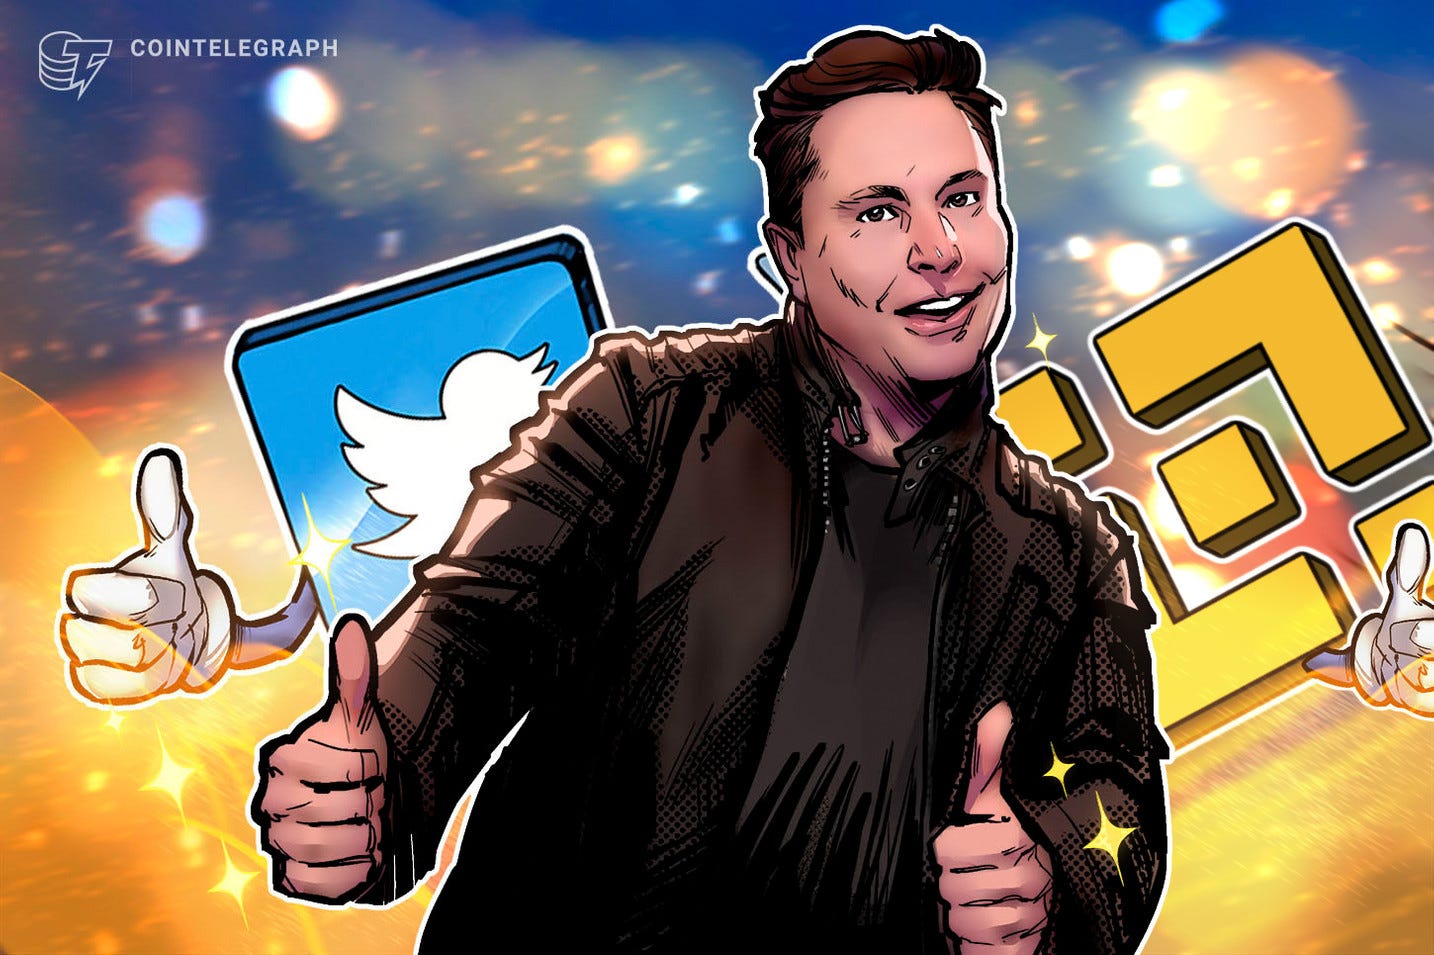 Binance commits $500M to co-invest in Twitter with Elon Musk